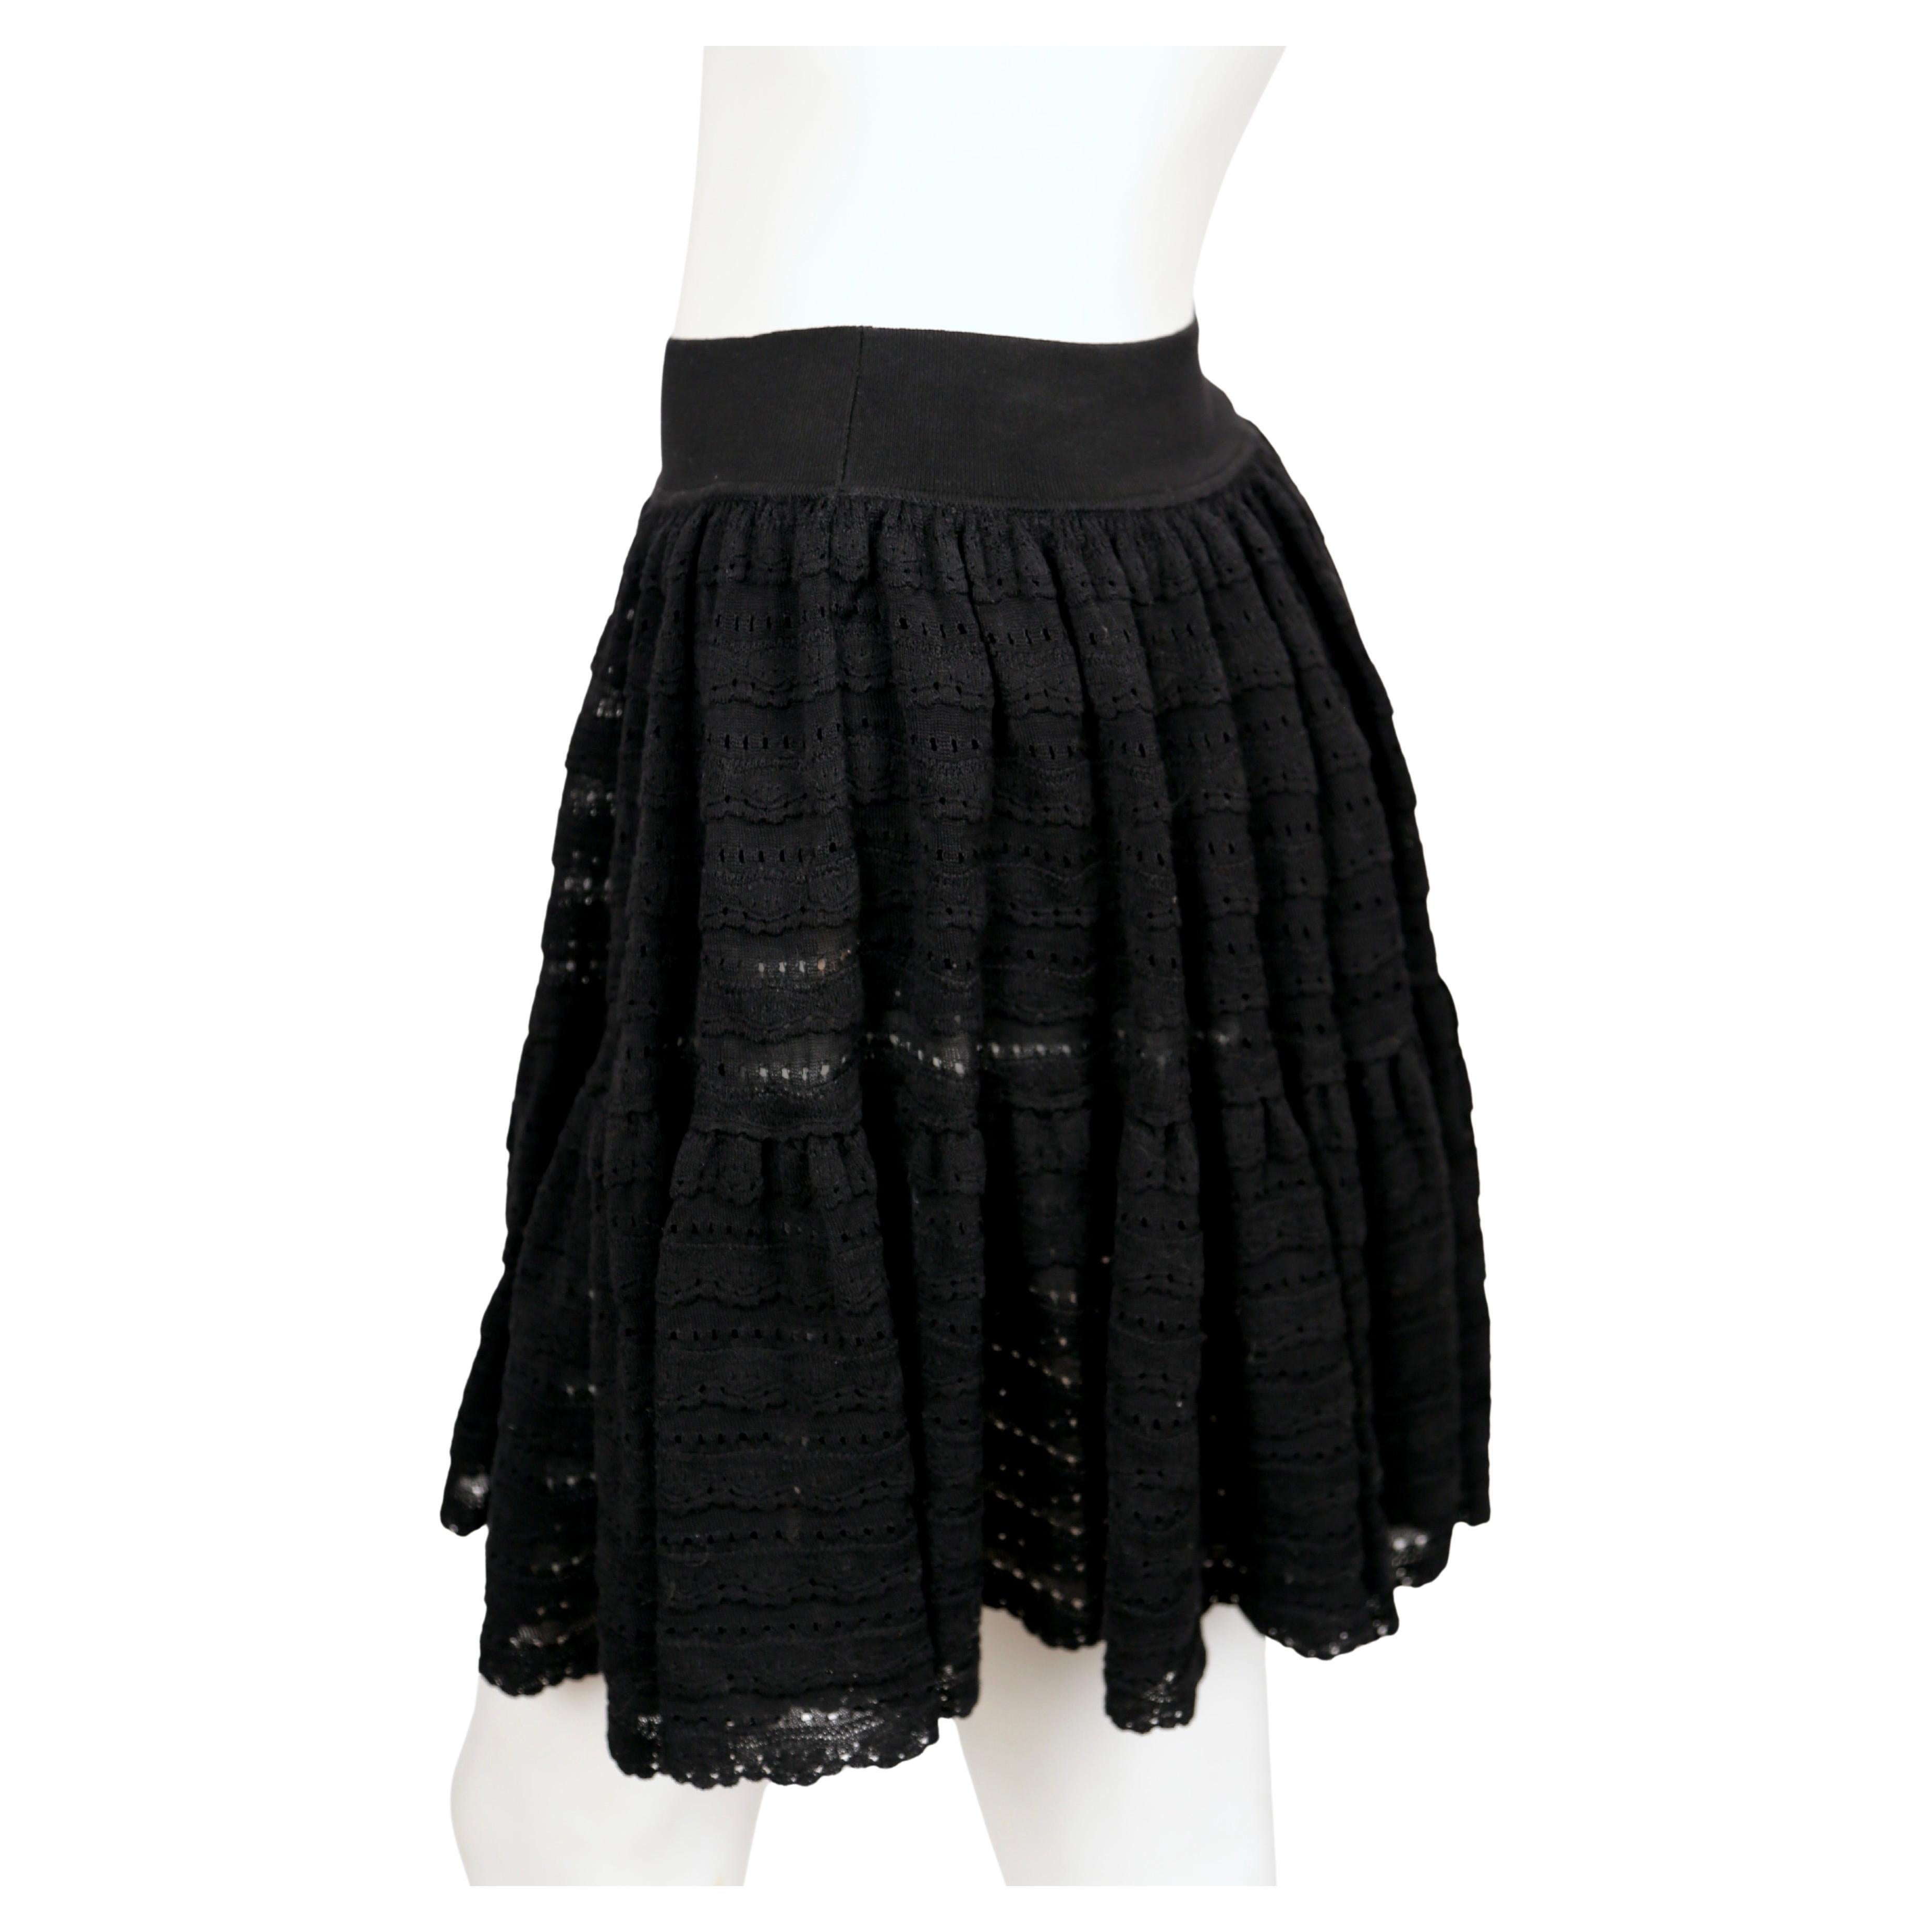 2000's AZZEDINE ALAIA black pointelle knit skirt with ruffles & hidden shorts For Sale 2